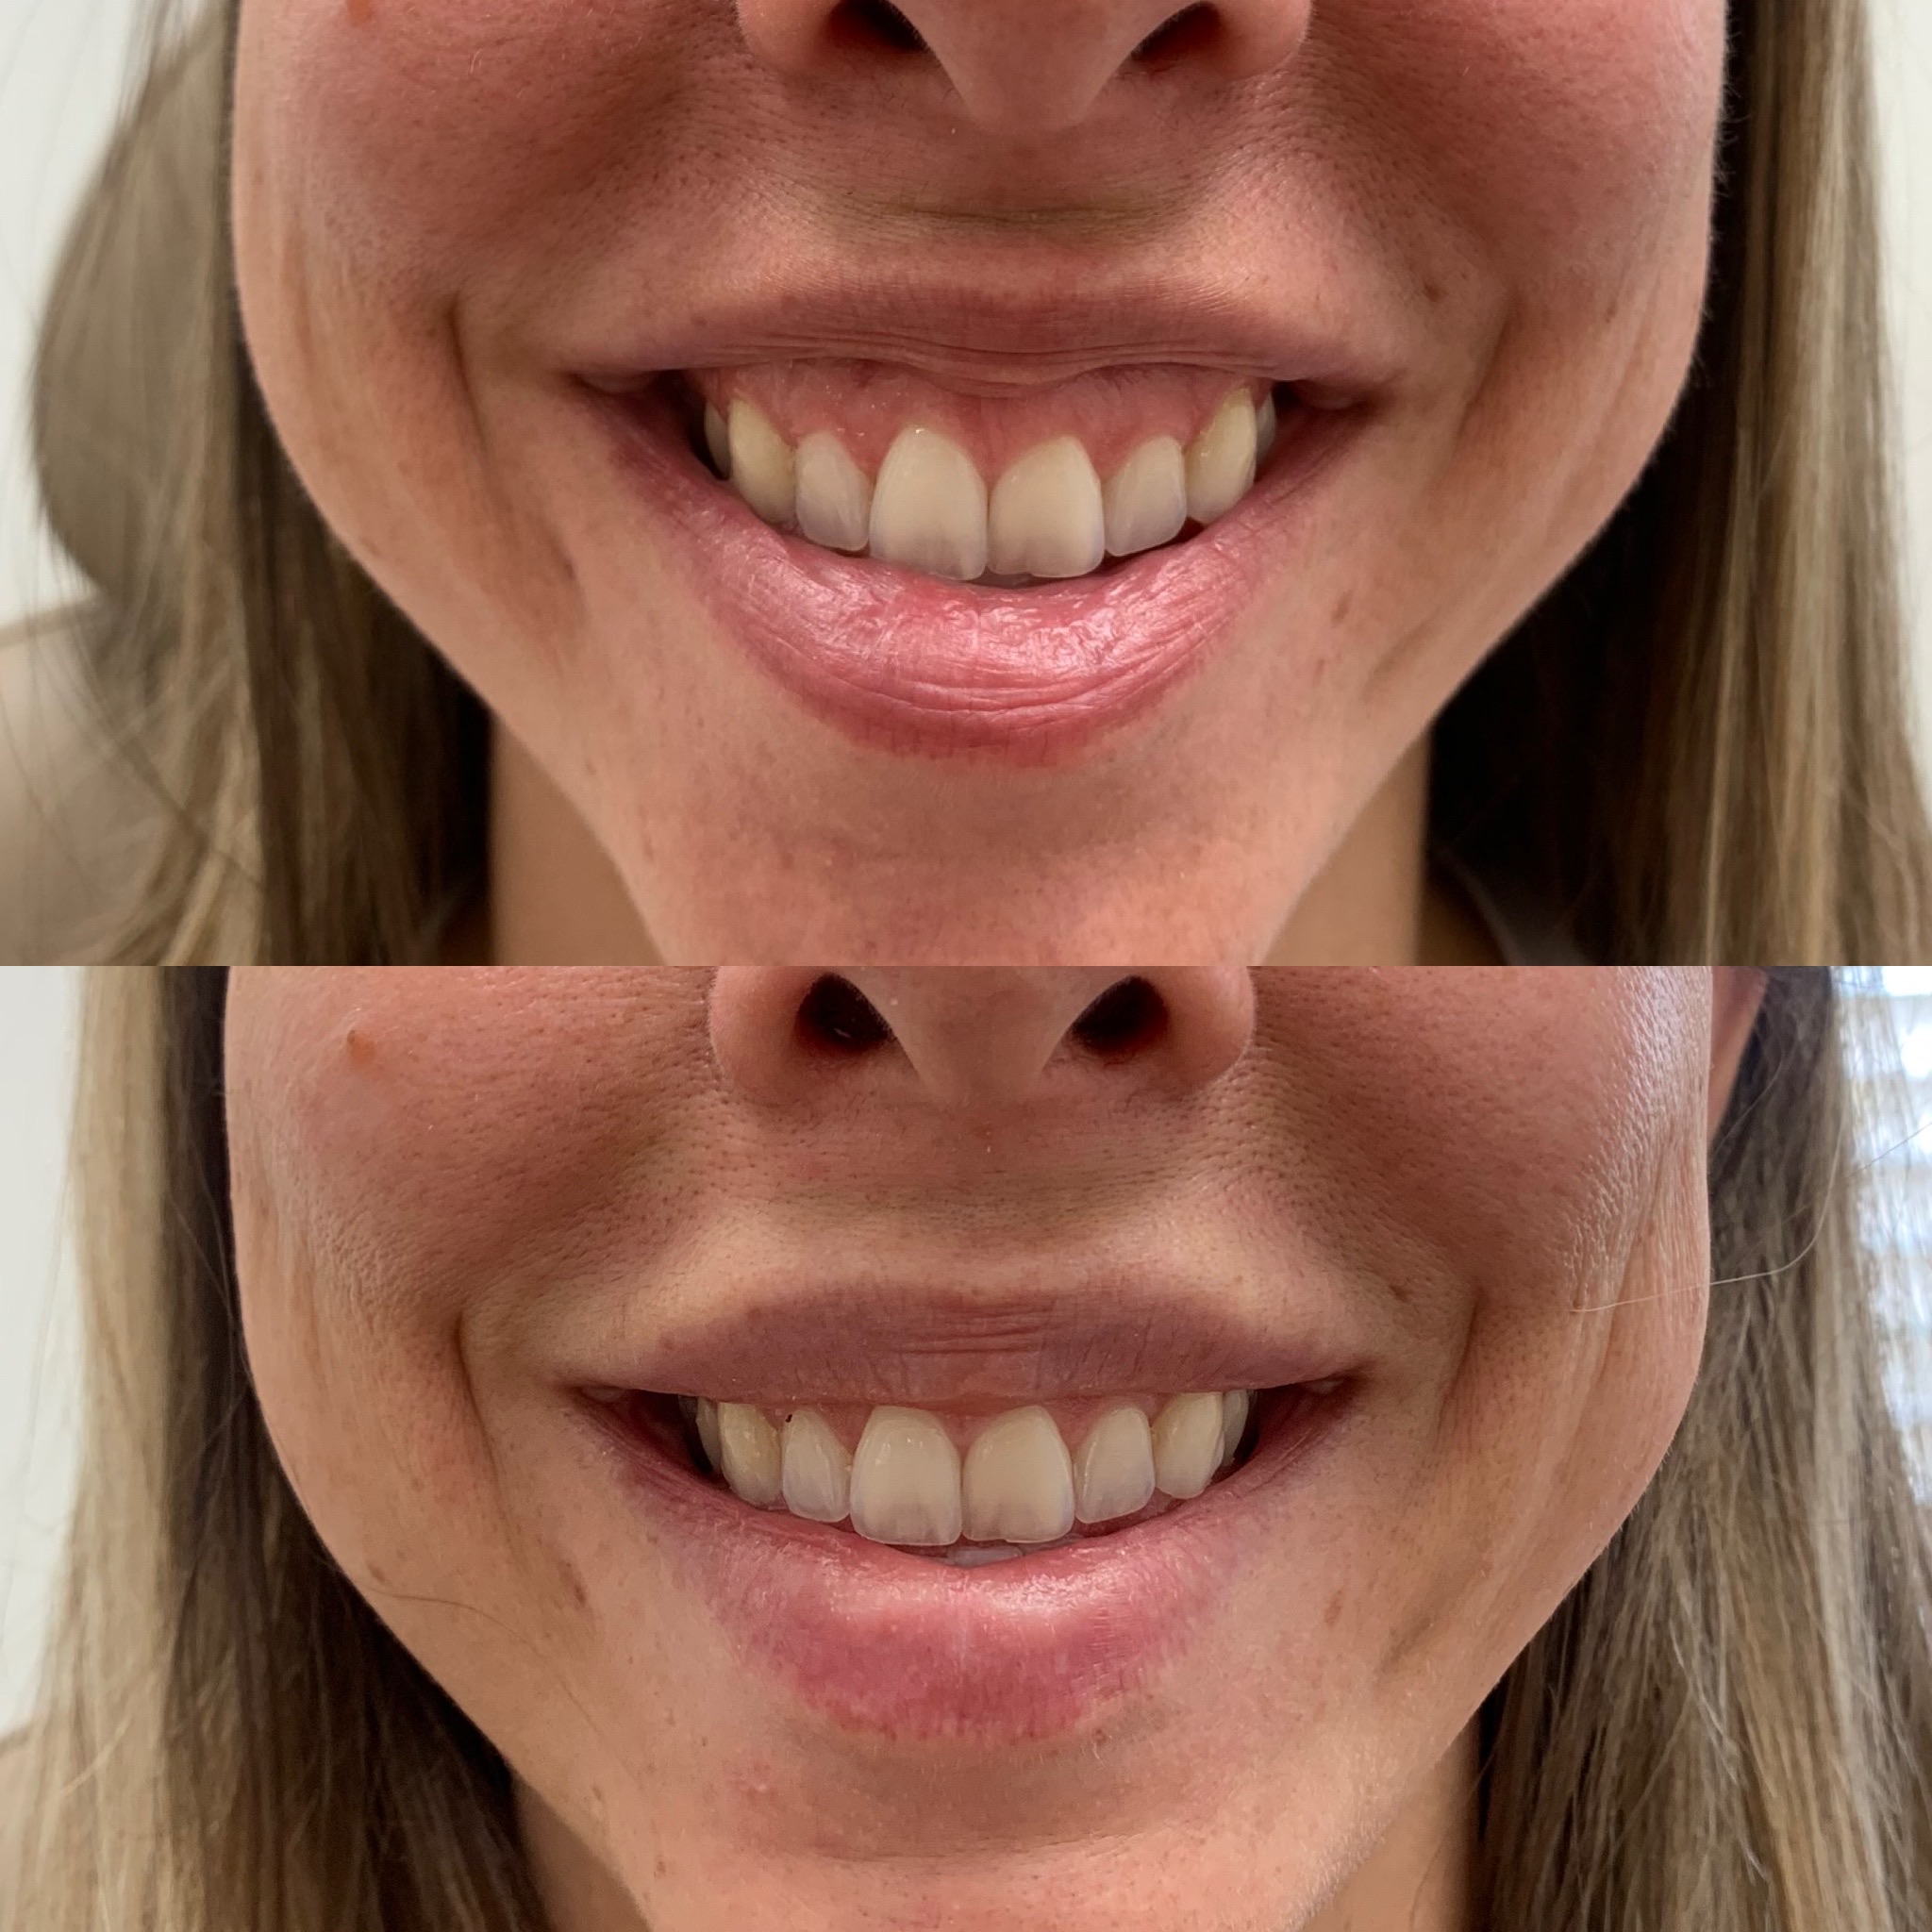 Before and After Botox Treatment on Lip Lines | Beauty Boost Med Spa in Newport Beach, CA